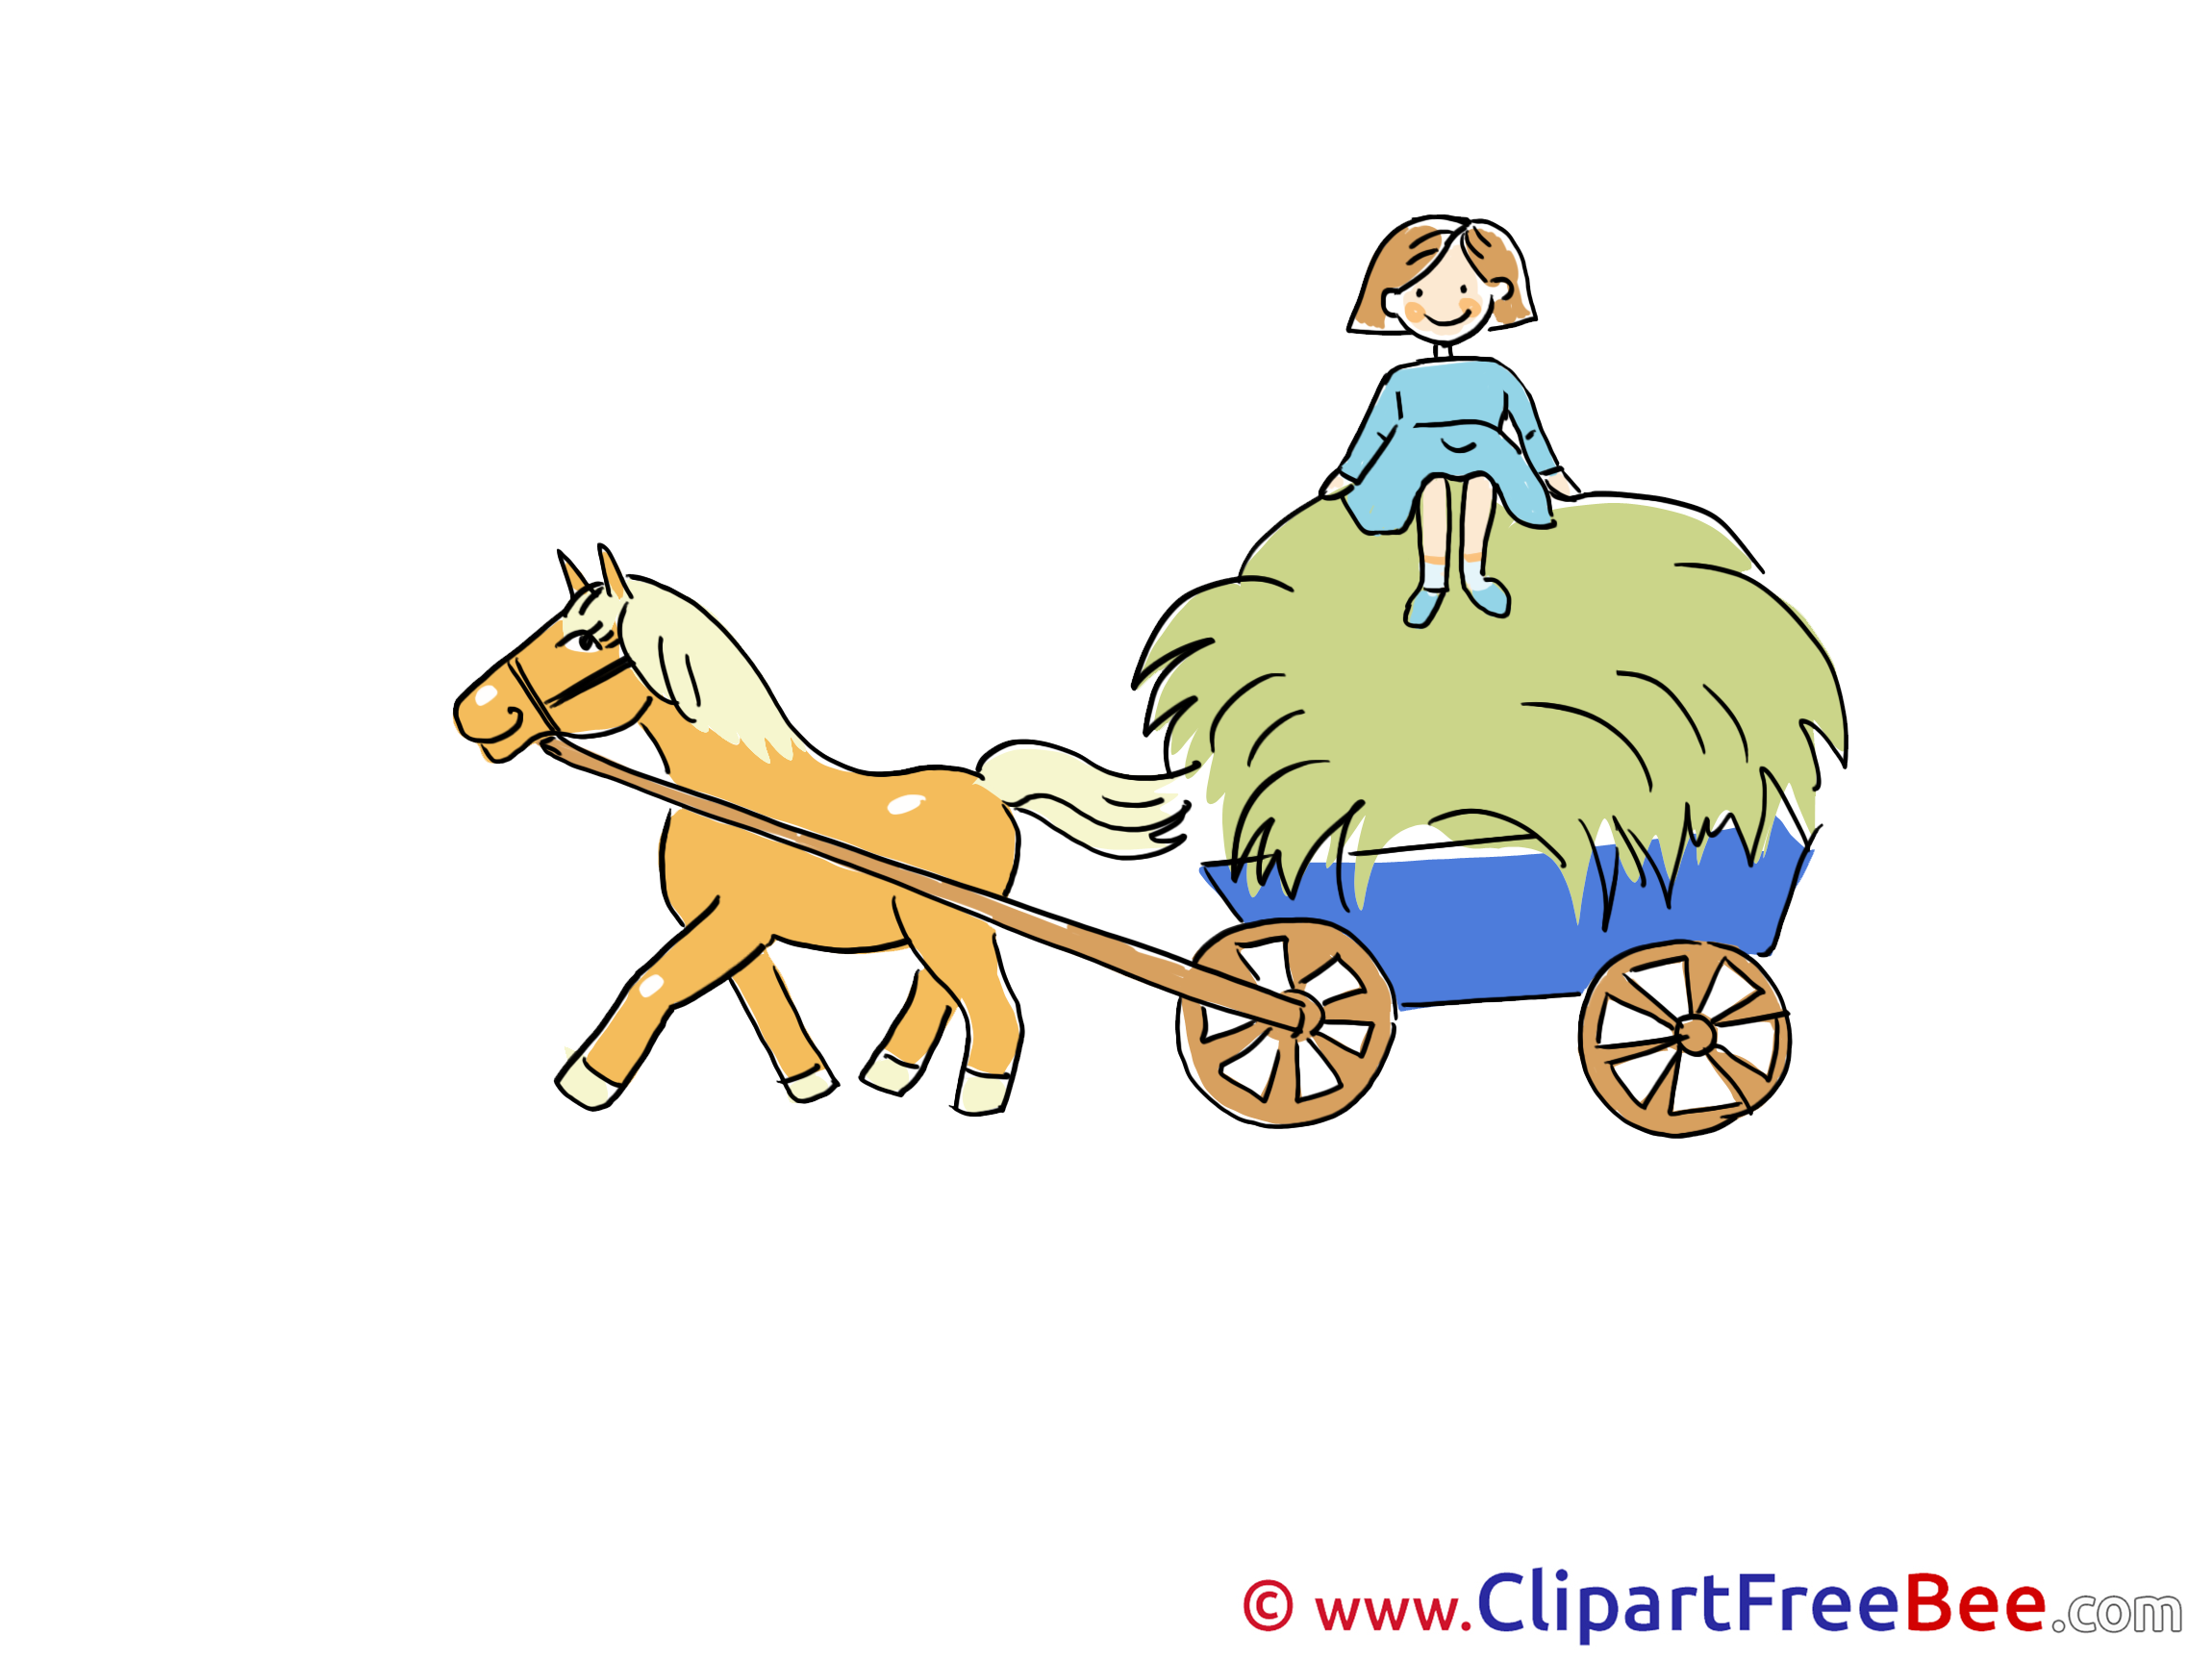 Cart Horse Clipart free Image download